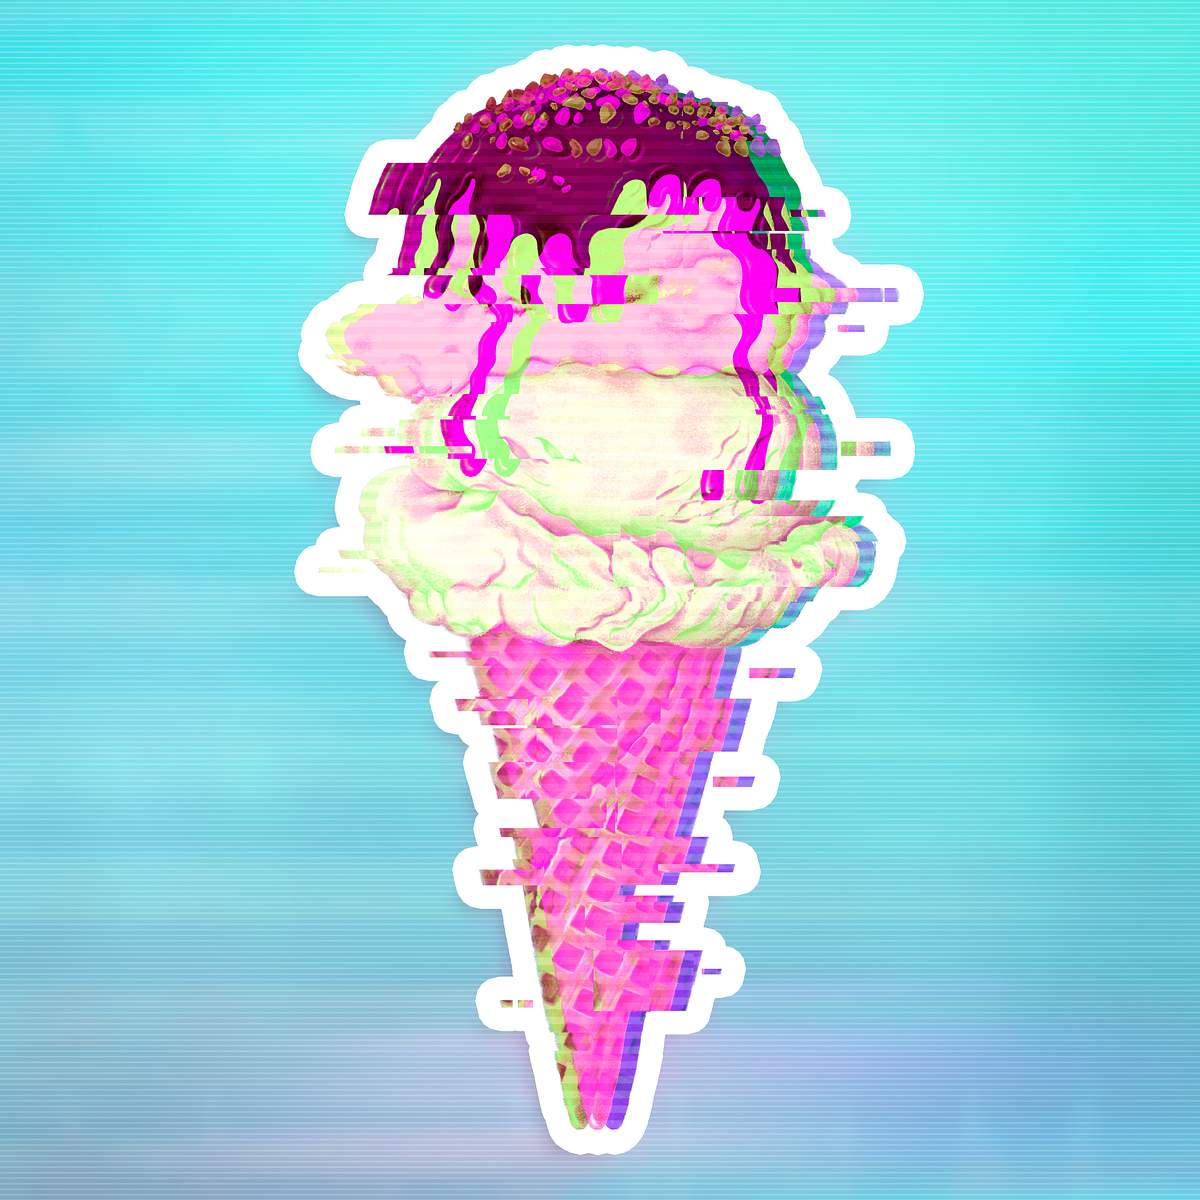 Ice Cream With Glitch Effect Sticker With White Border Royalty Free Illustration 2350623 - creamys ice cream decal roblox